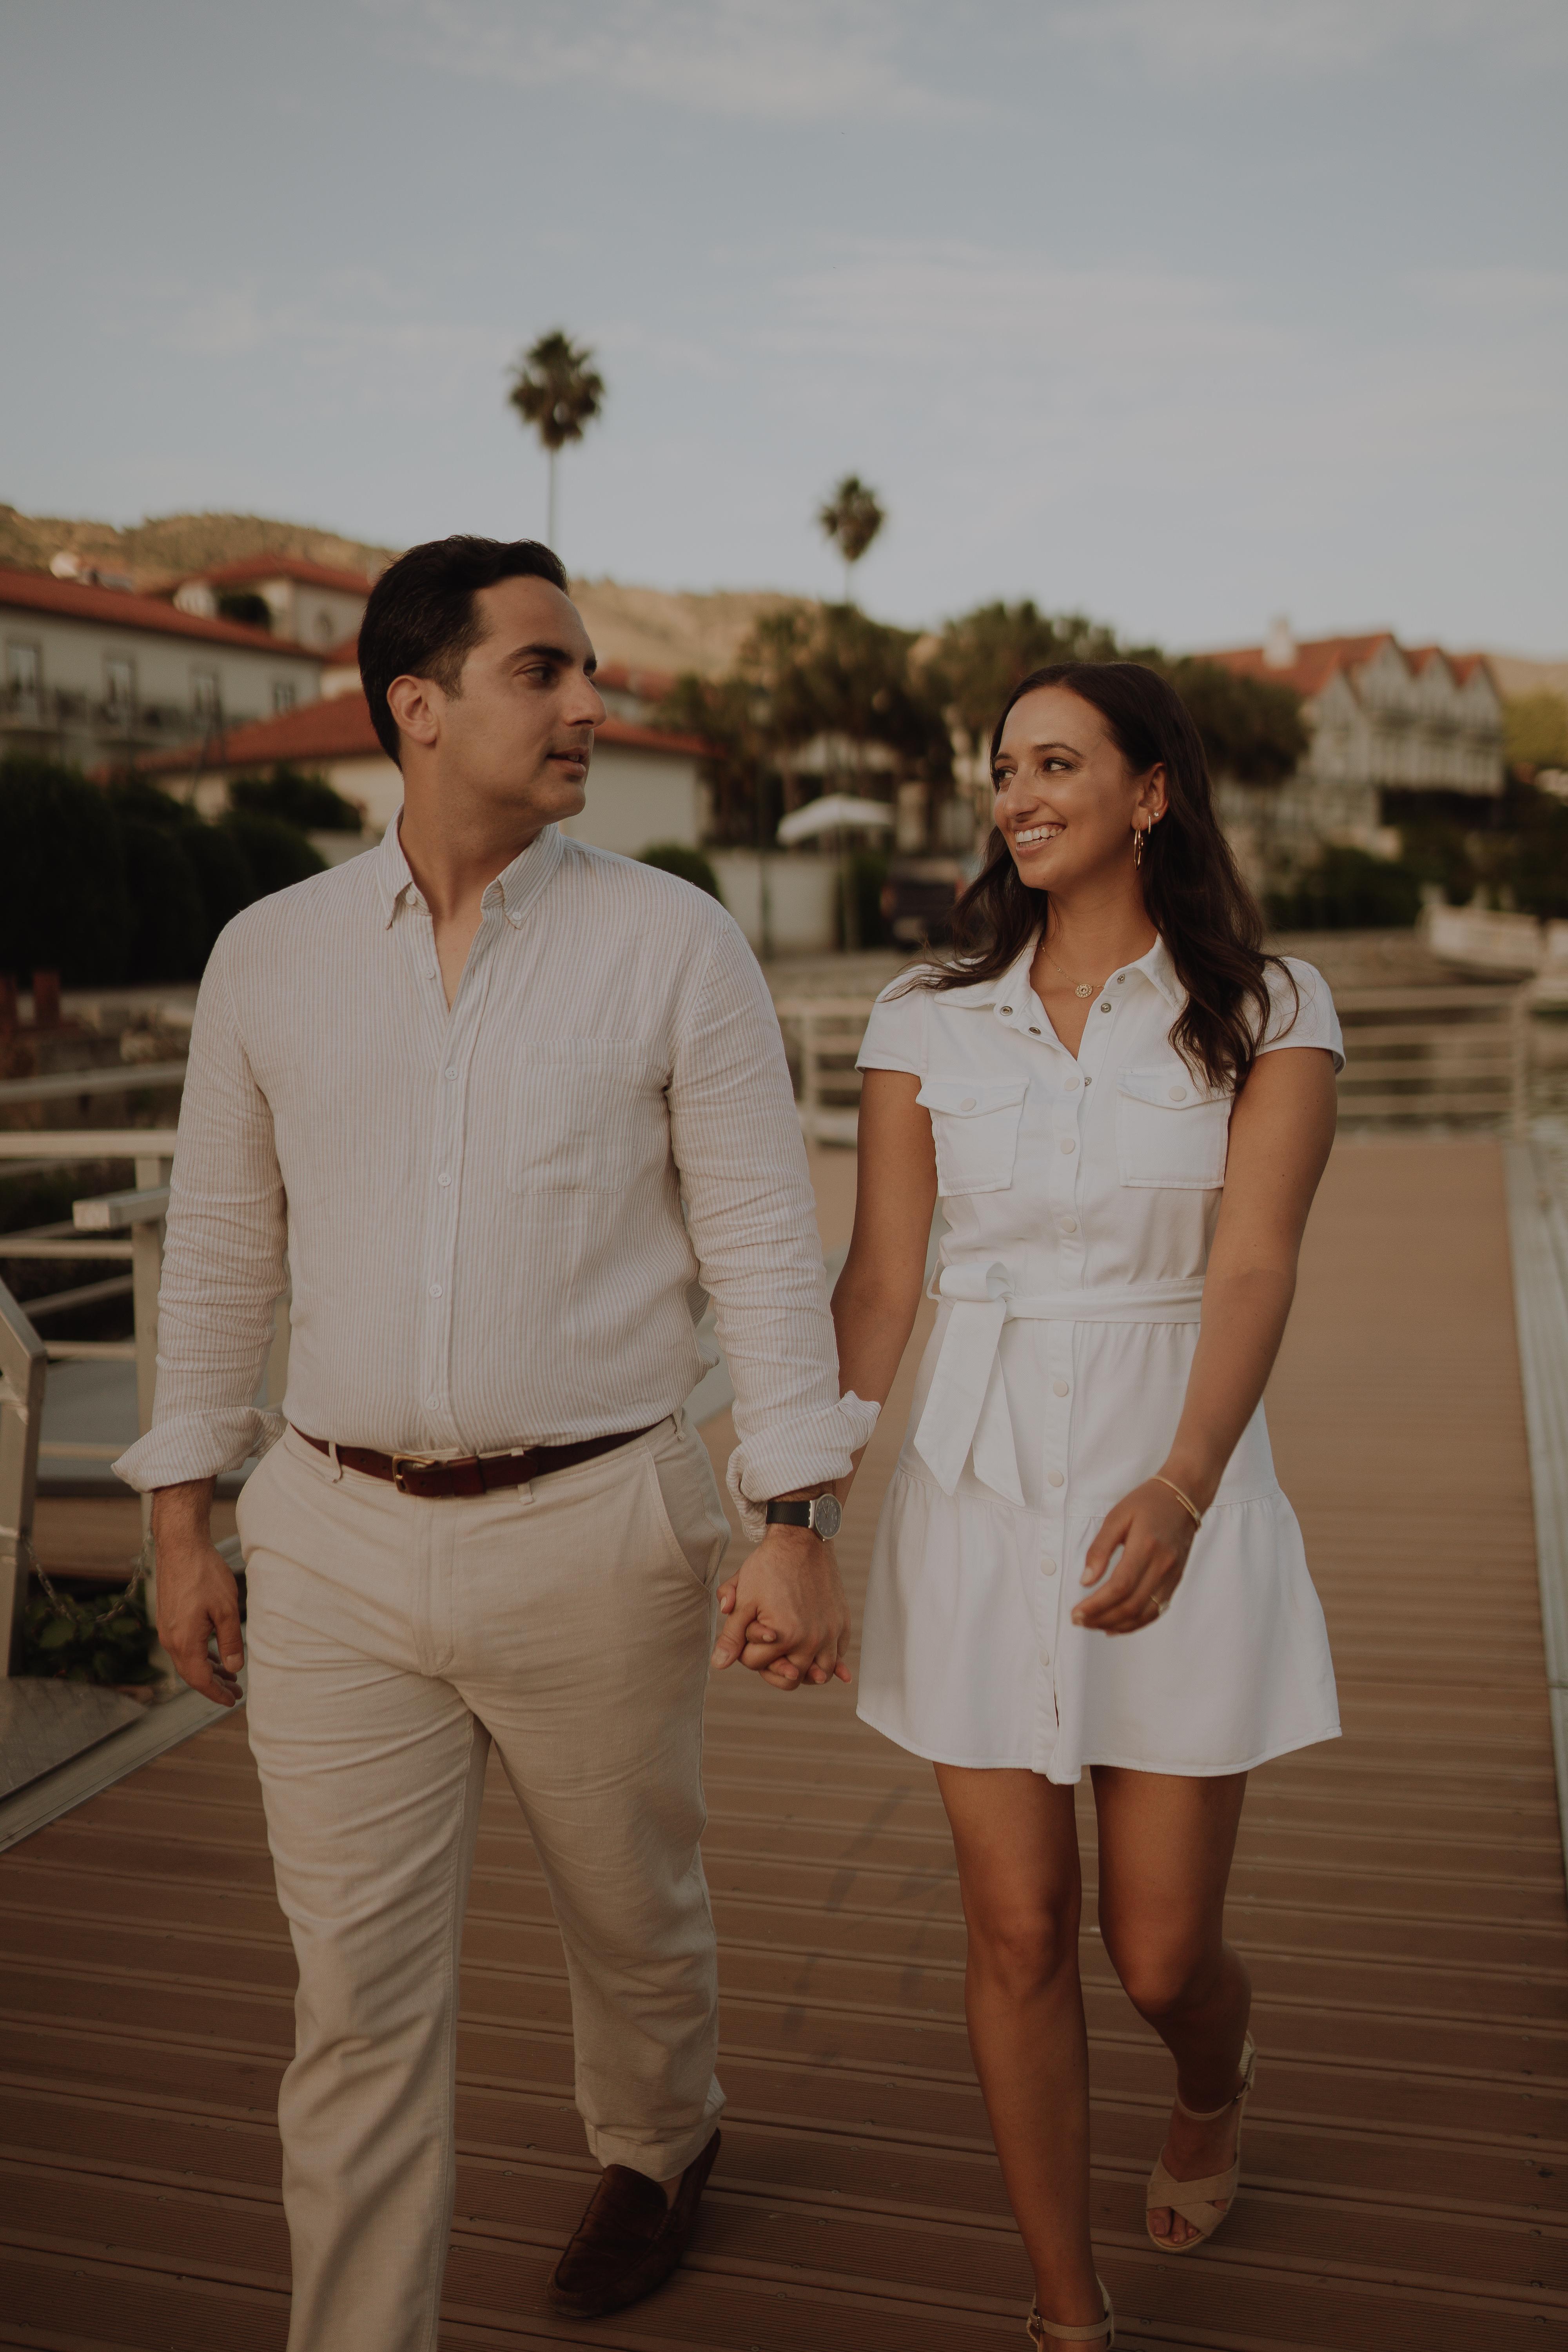 The Wedding Website of Lara Cohen and Victor Lavi